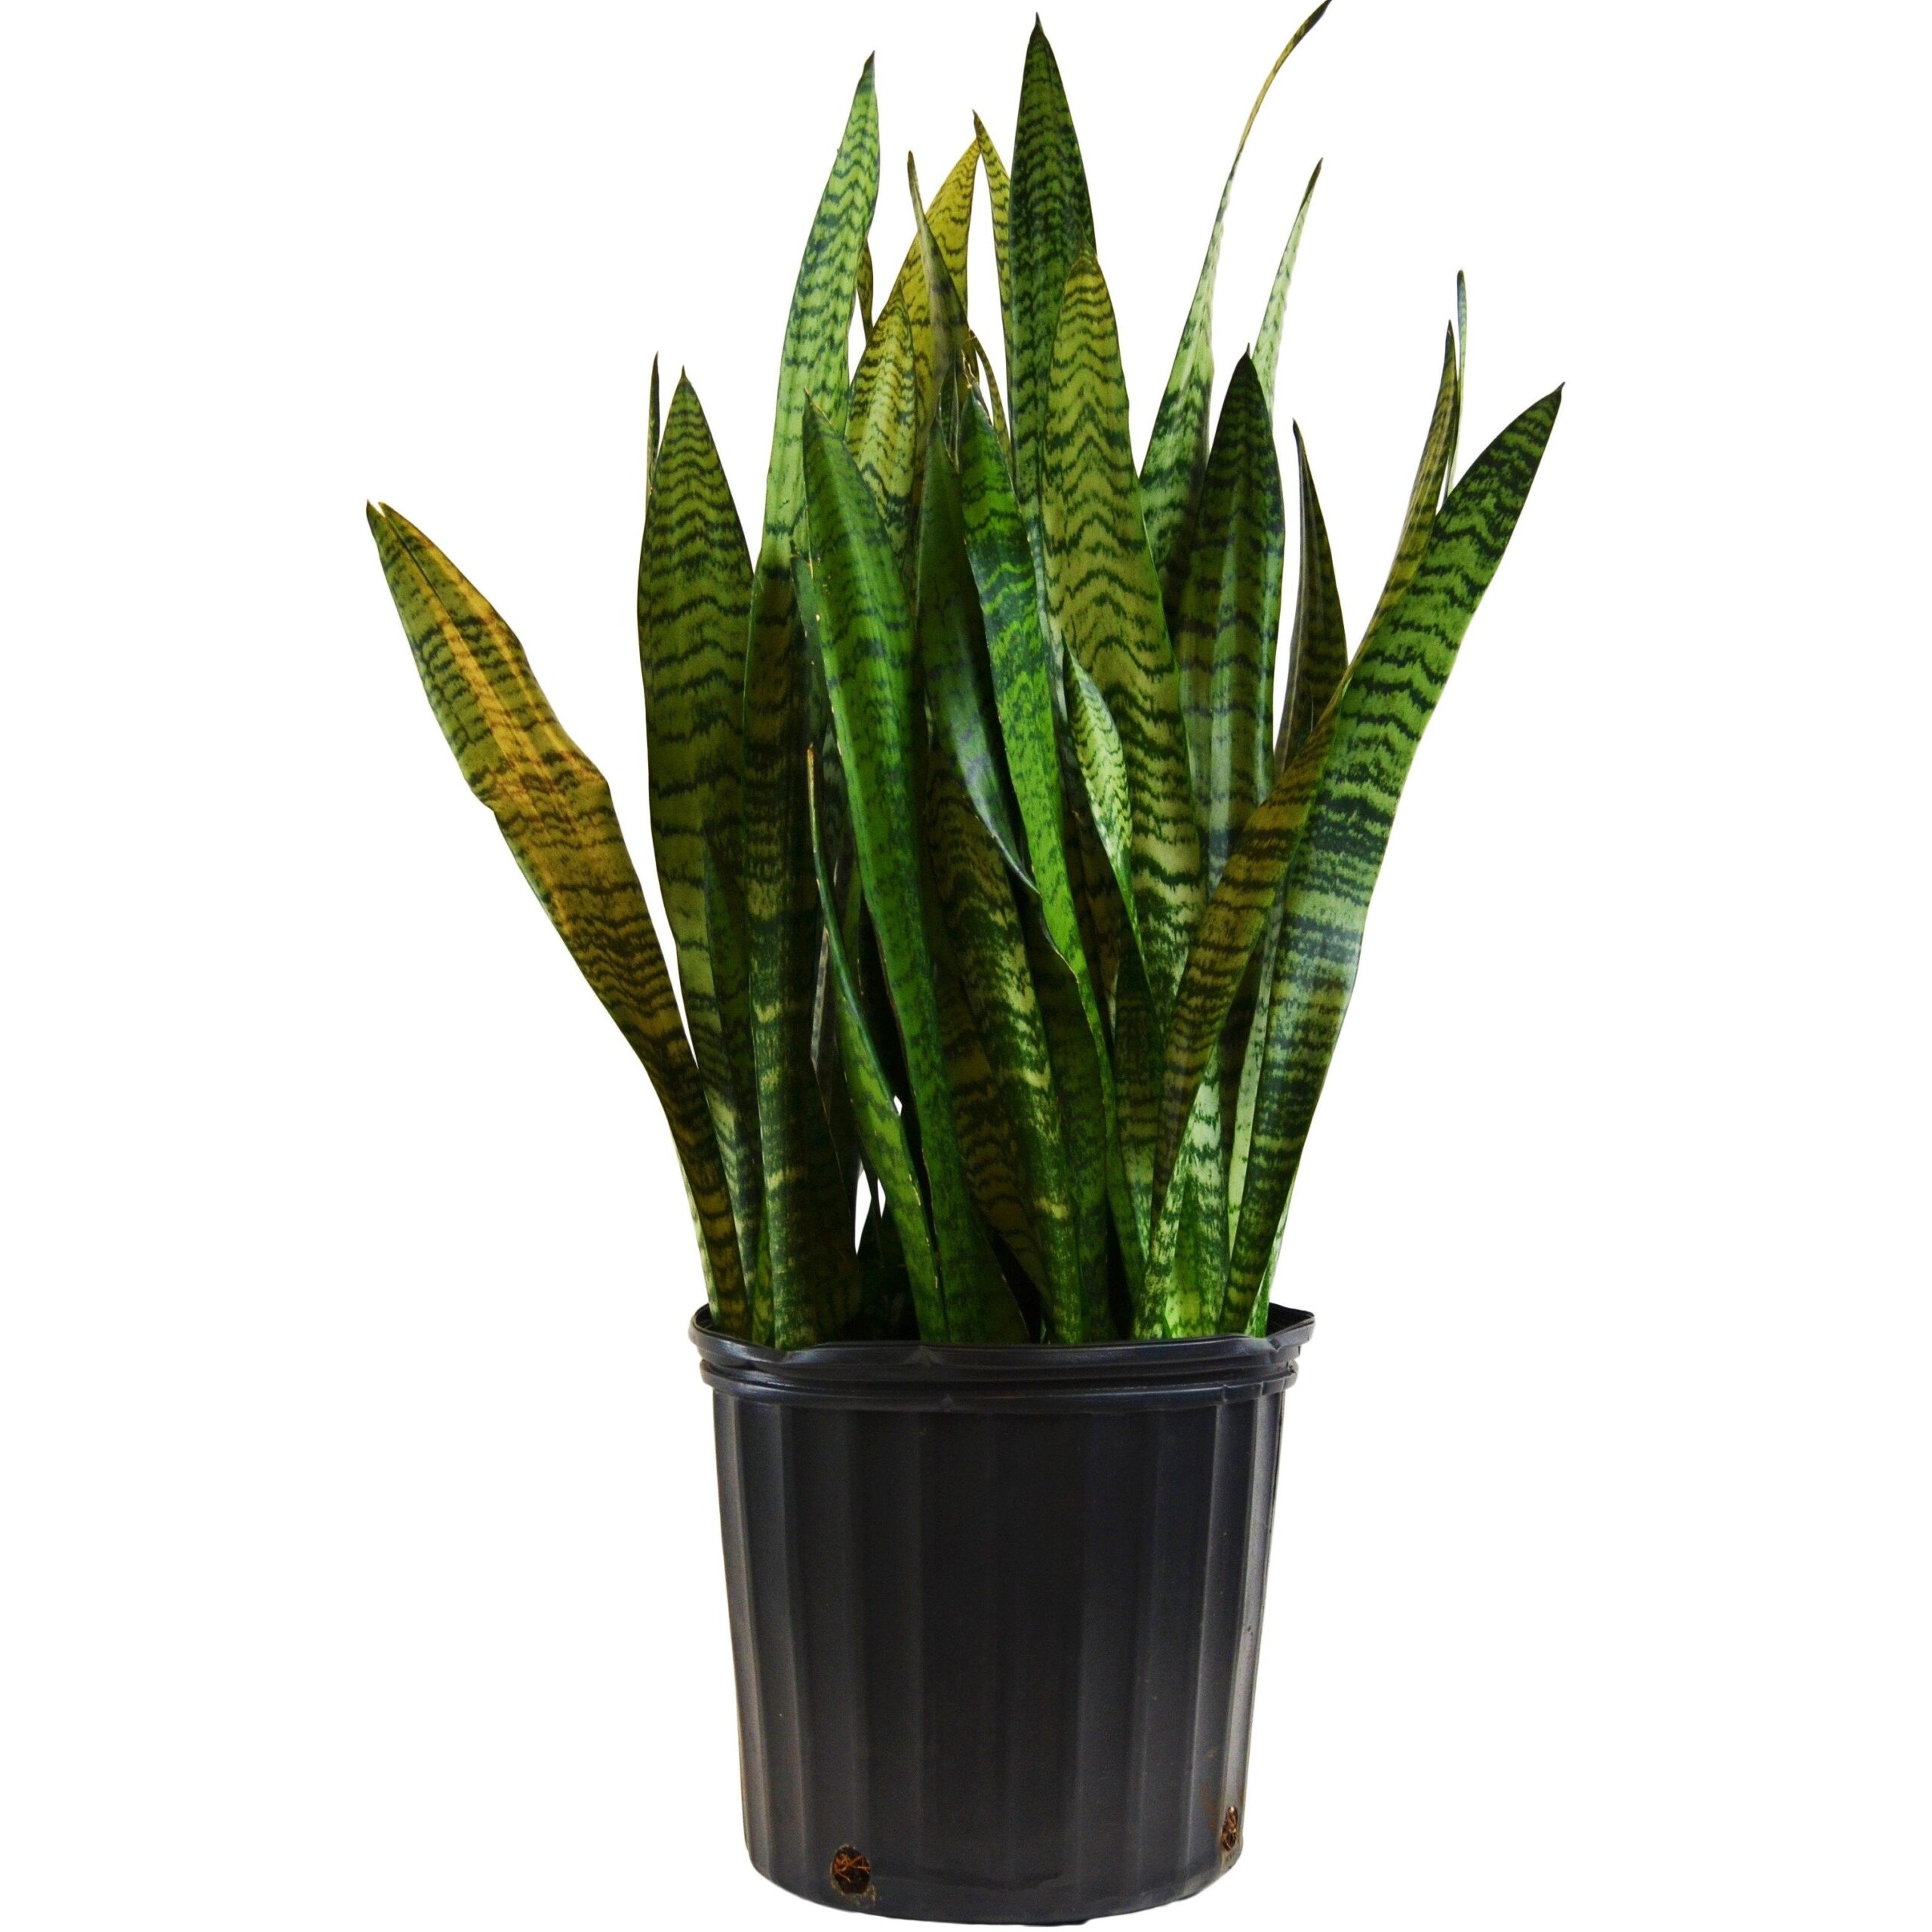 Snake plant in a black pot on a white background at the best garden center near me.